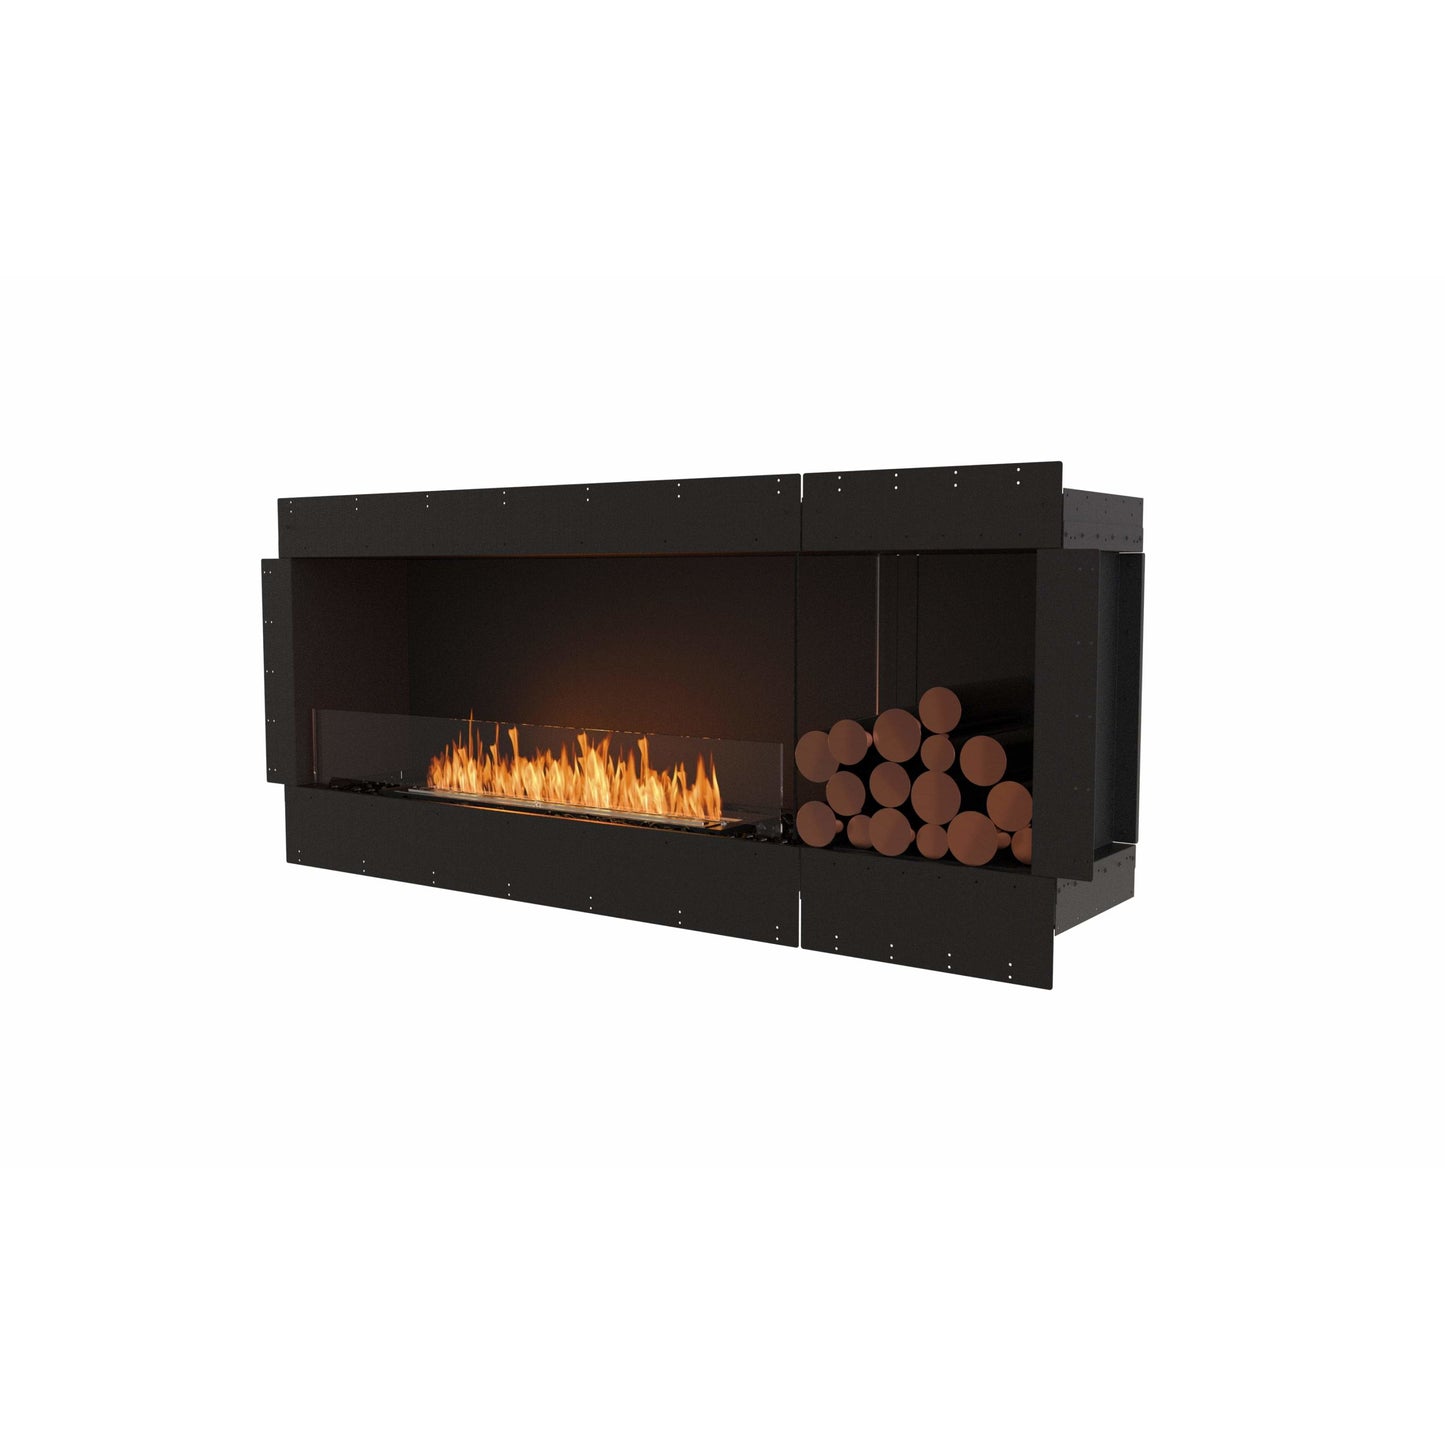 EcoSmart Flex 68SS.BXR; best flueless bio ethanol fireplace in black. 76 inches wall fireplace with a decorative box for sale